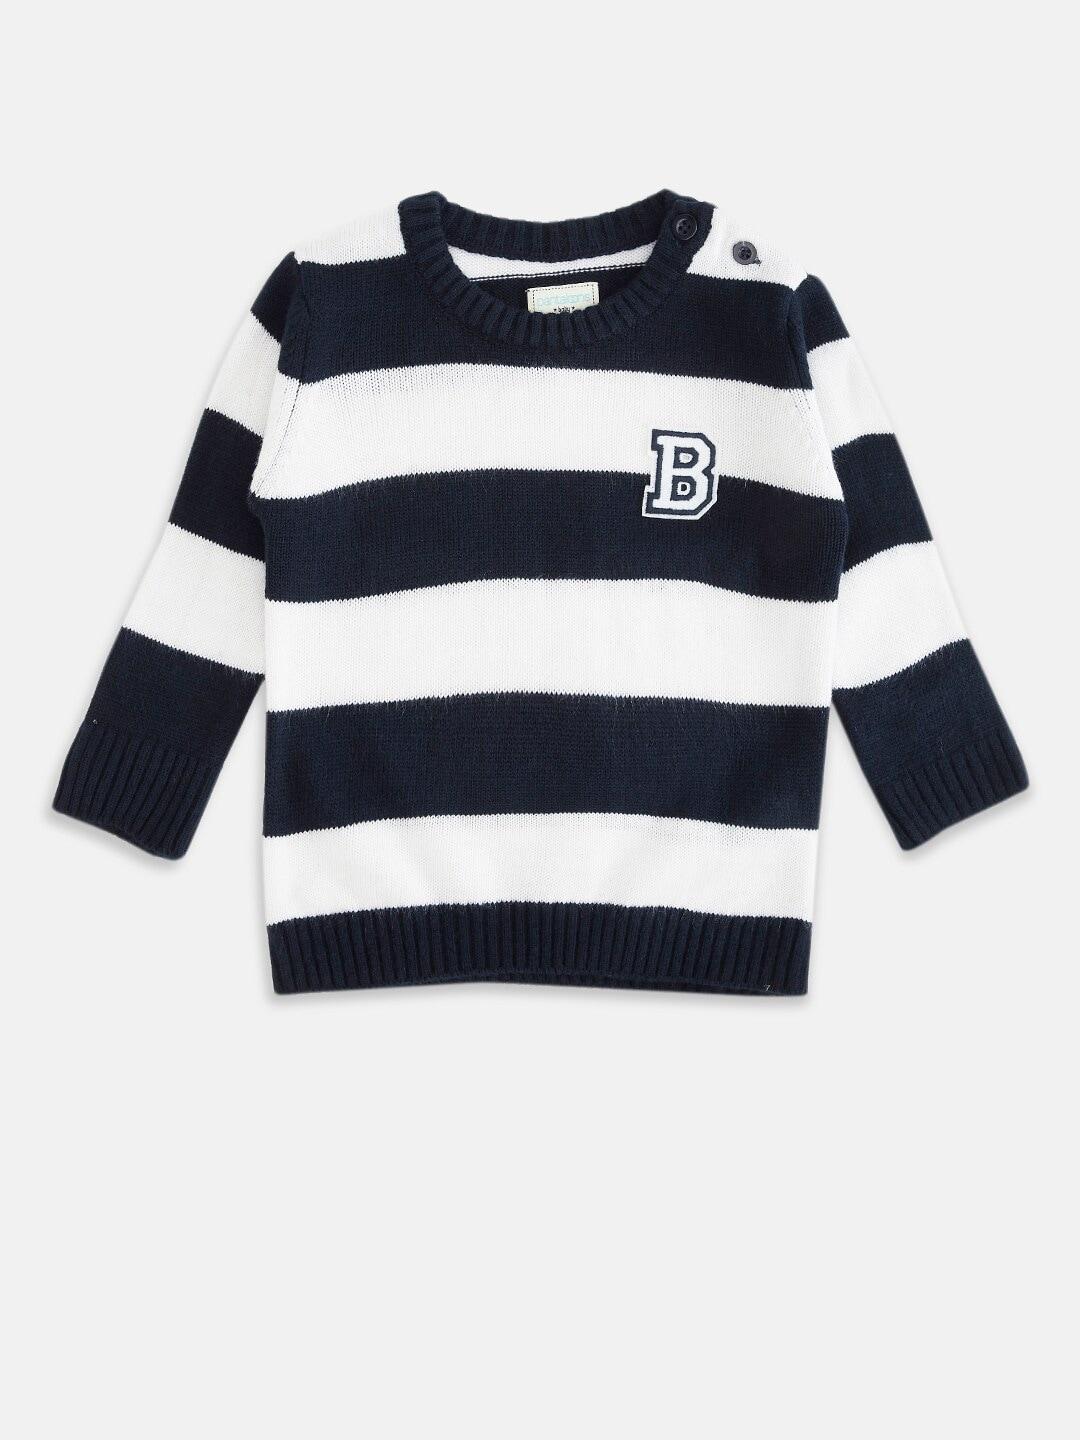 pantaloons baby boys navy blue & white striped pullover